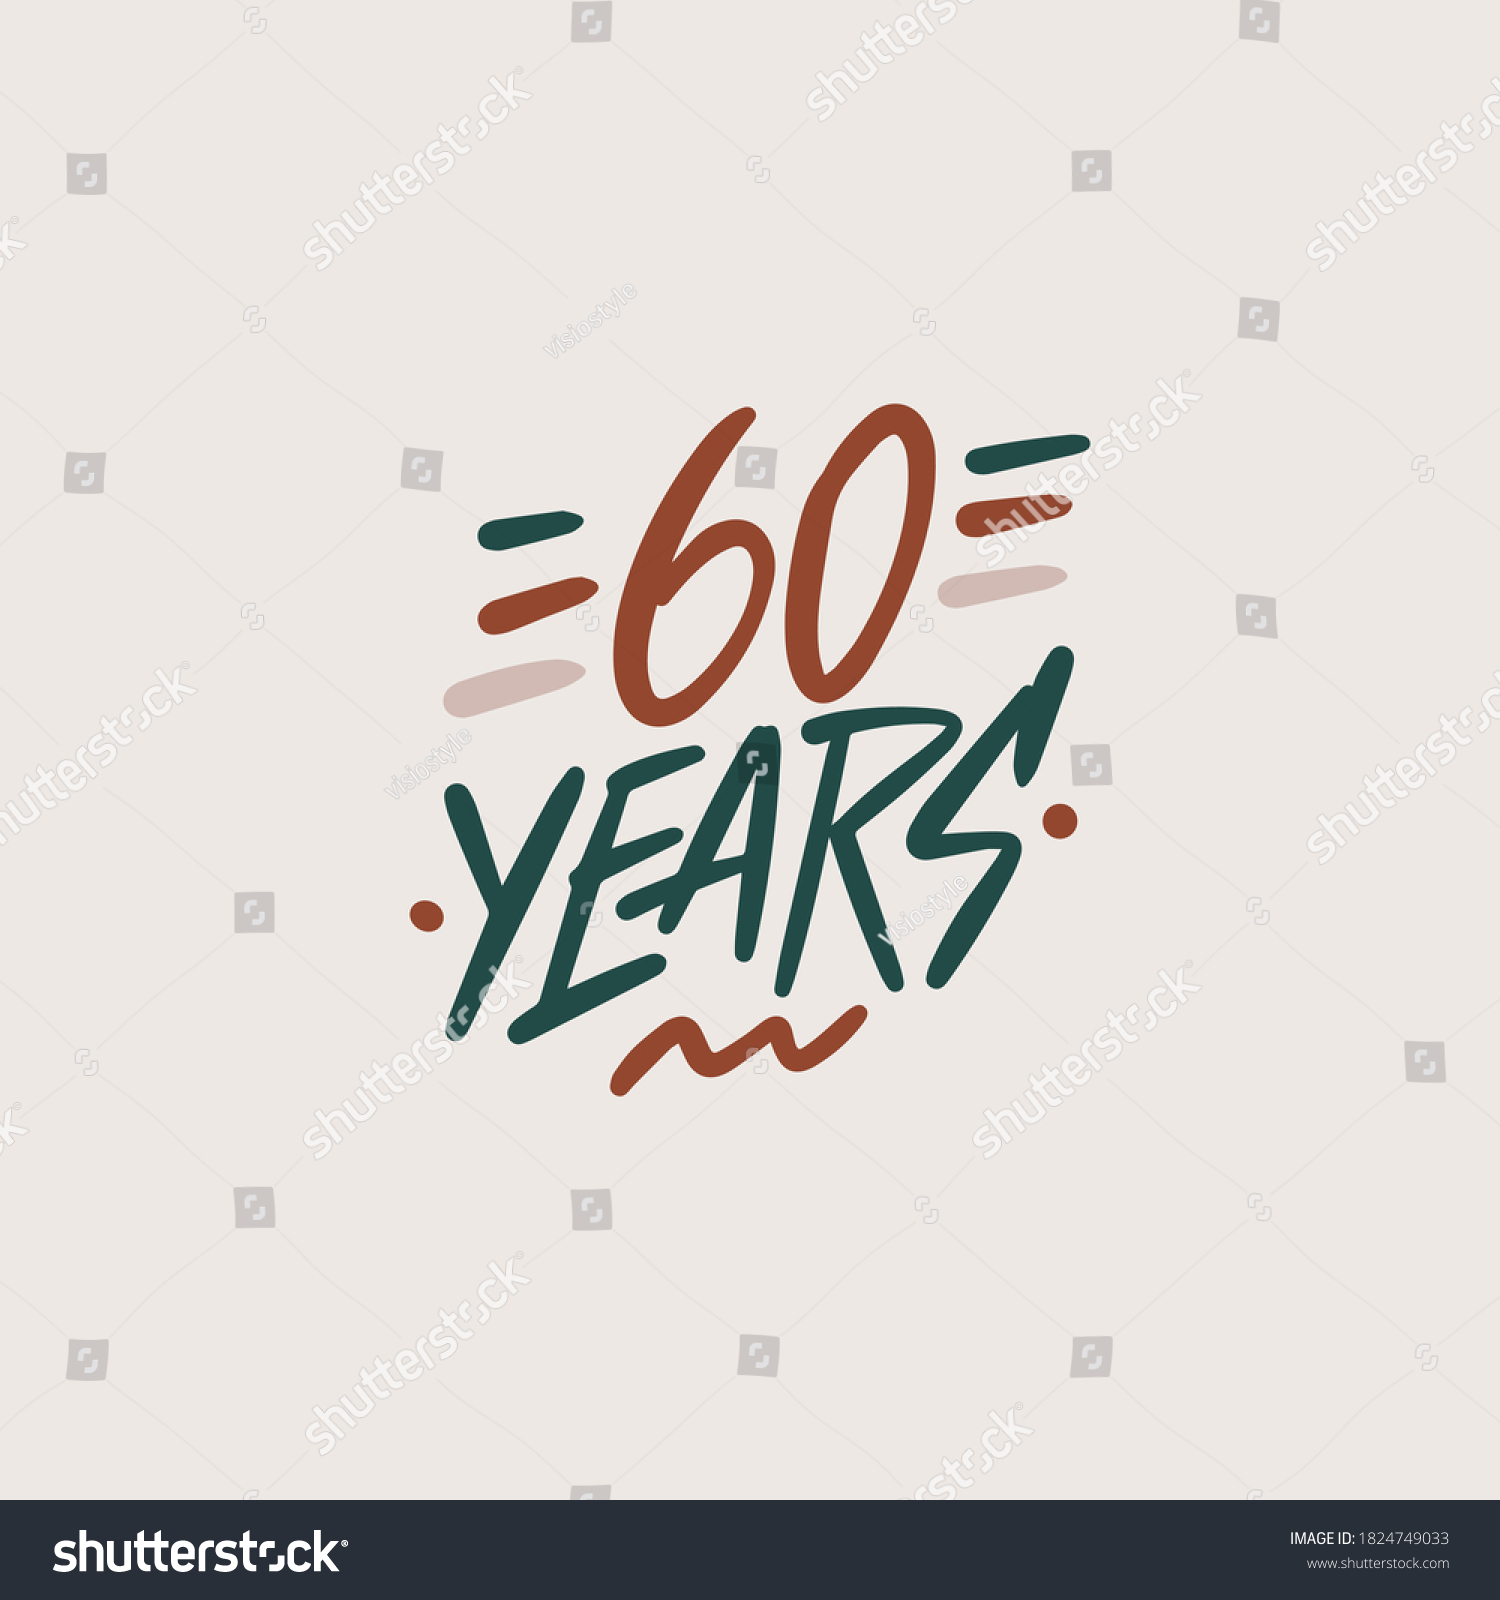 60 years anniversary pictogram vector icon, 60th - Royalty Free Stock ...